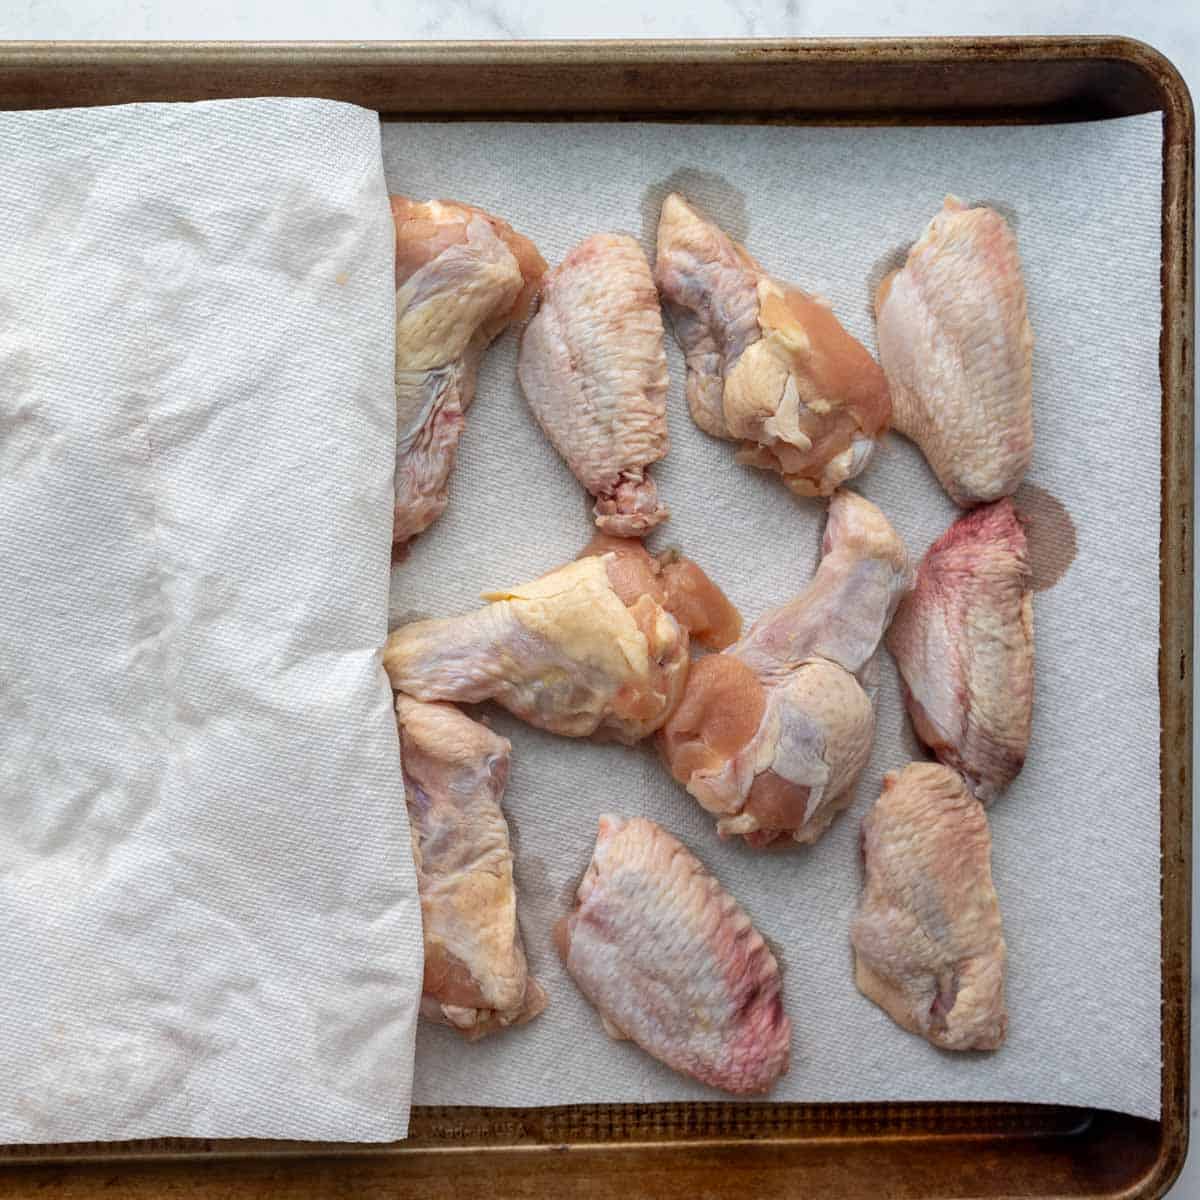 the wings being dried with paper towels on a baking sheet.